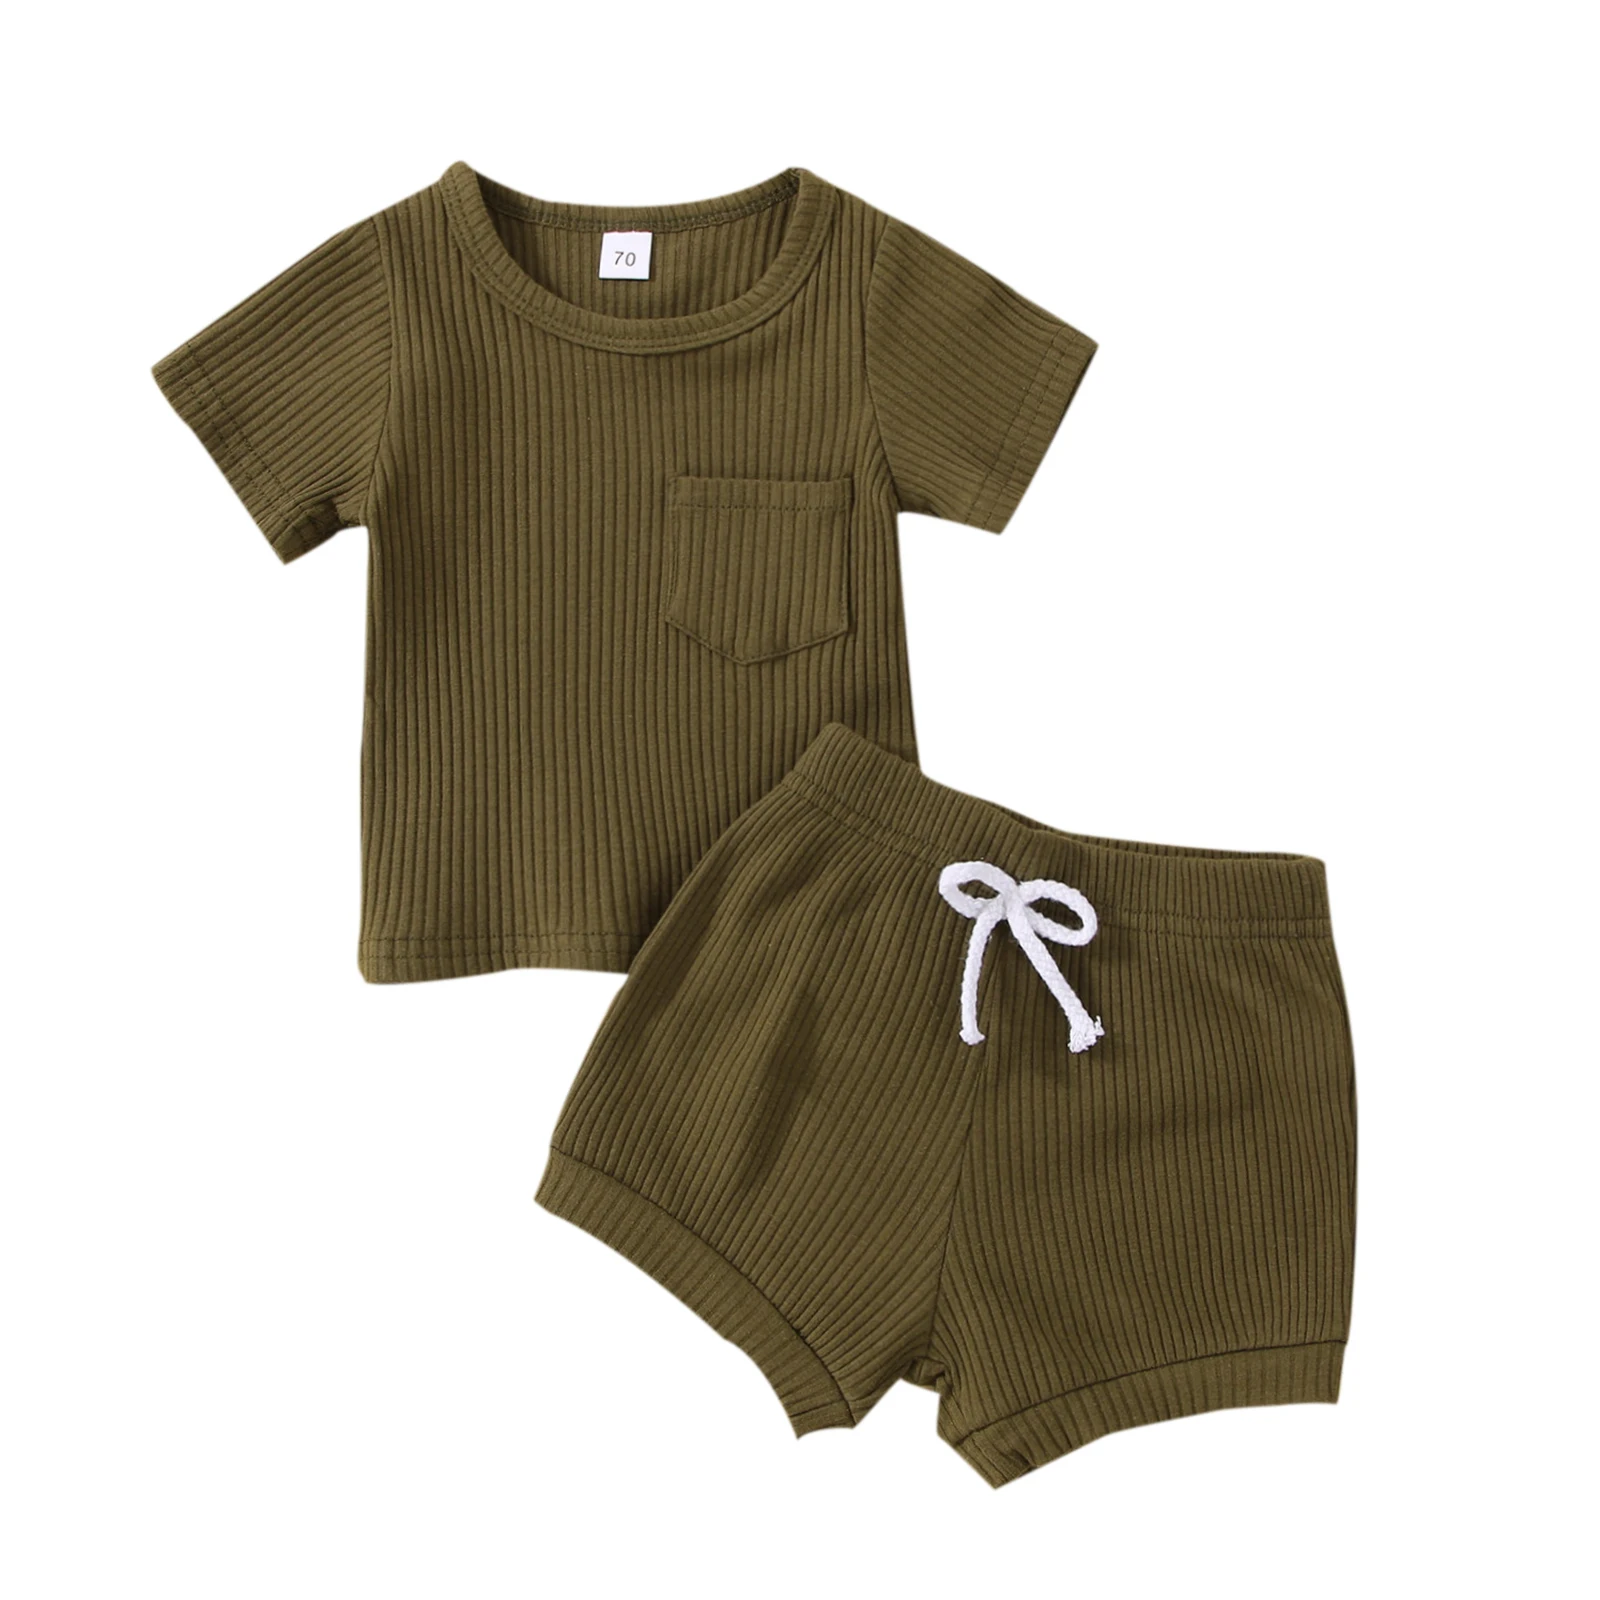 Lioraitiin 0-24M Newborn Infant Baby Girl Boy Outfits Sets Ribbed Knit Short Sleeve T-shirt Short Pant Solid Color Clothes Set Baby Clothing Set cheap Baby Clothing Set